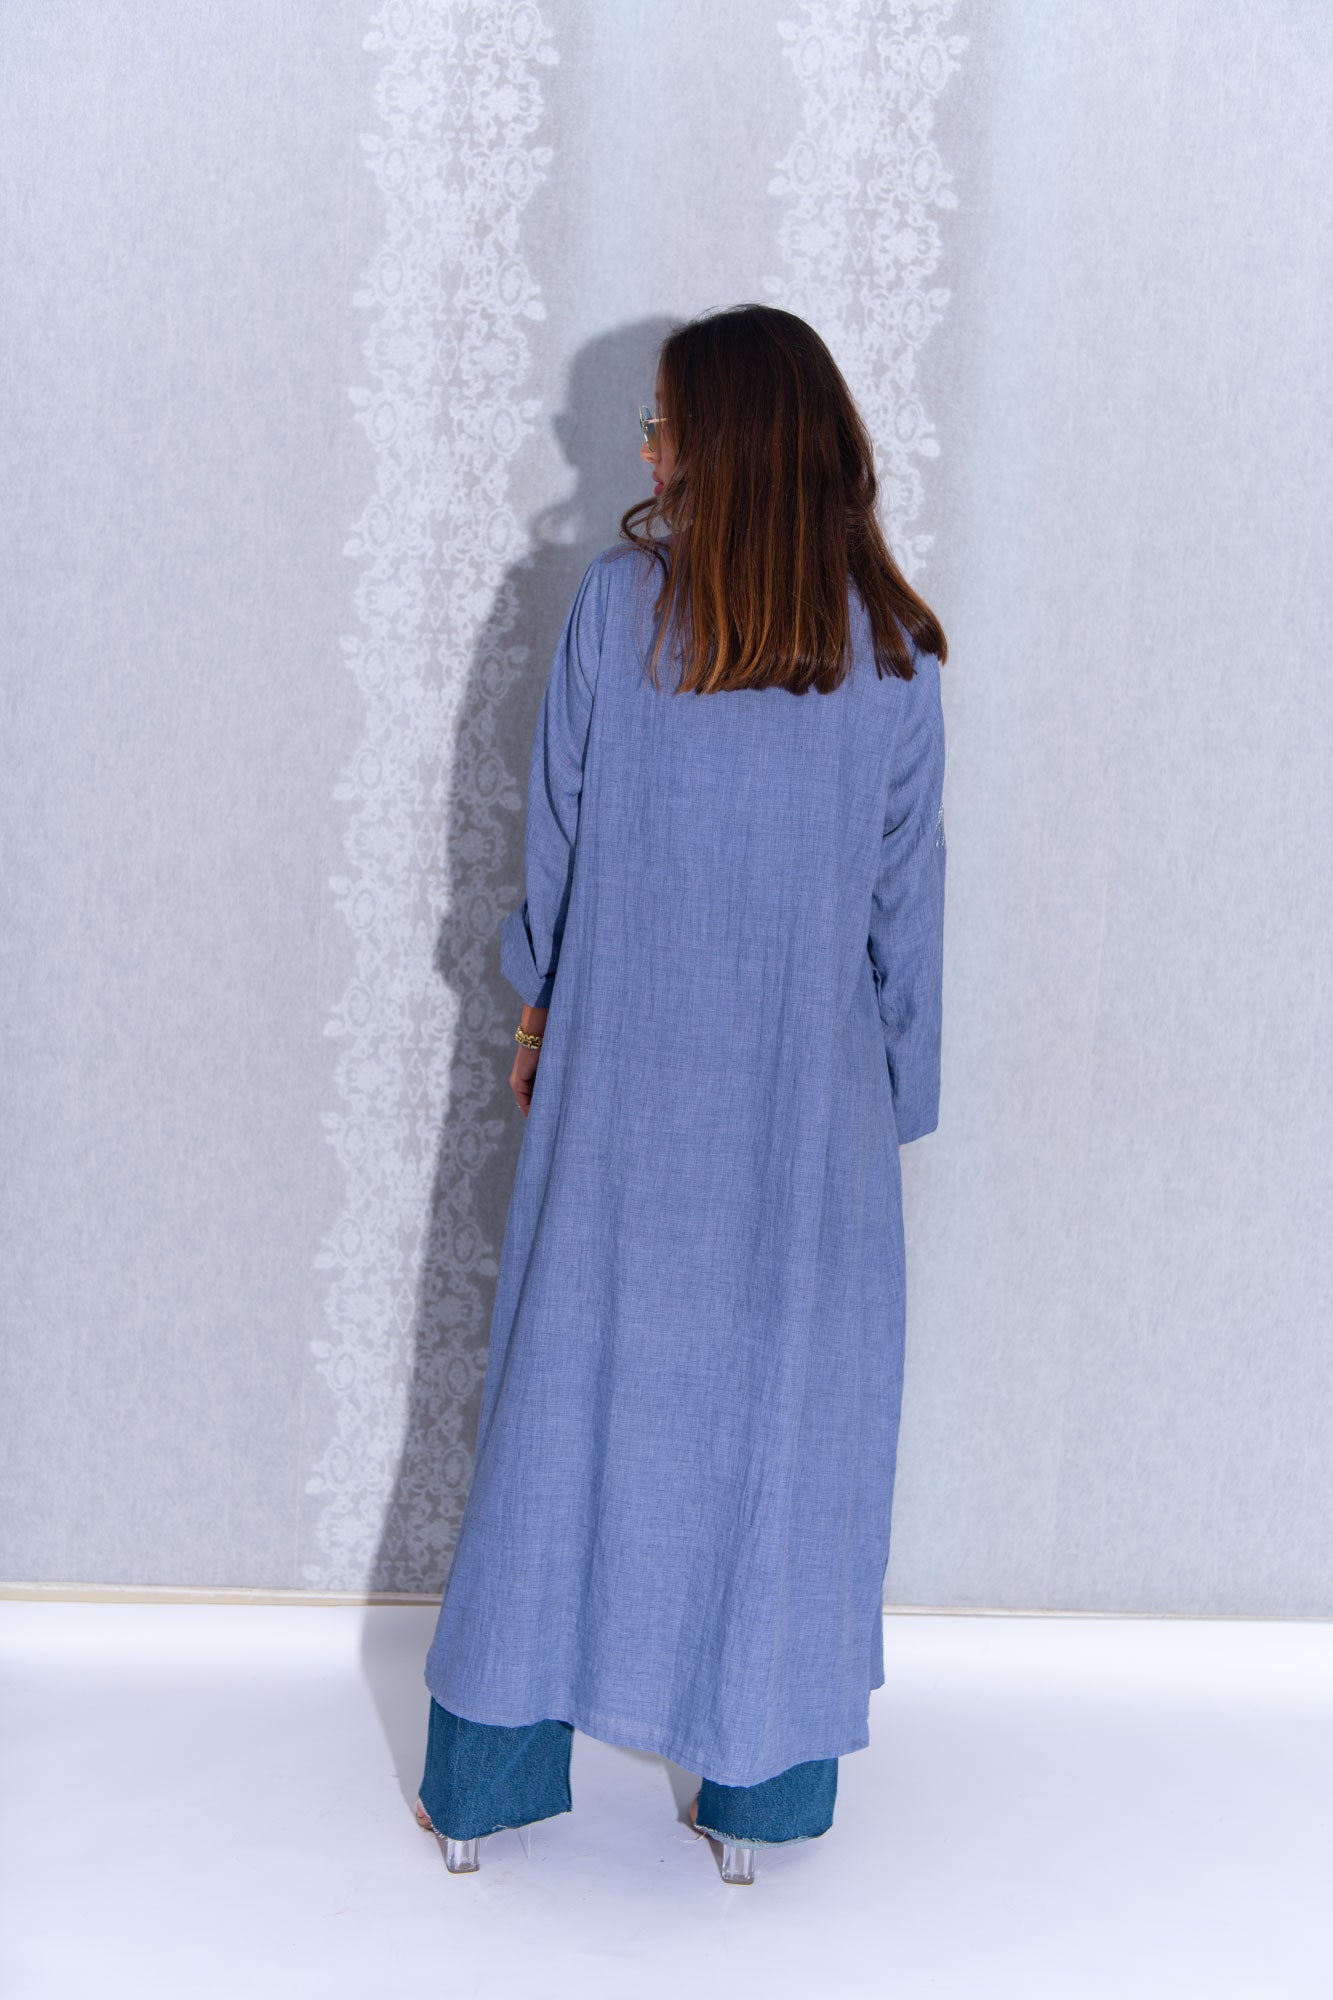 Blue Denim-Look Cotton Abaya with Embroidery